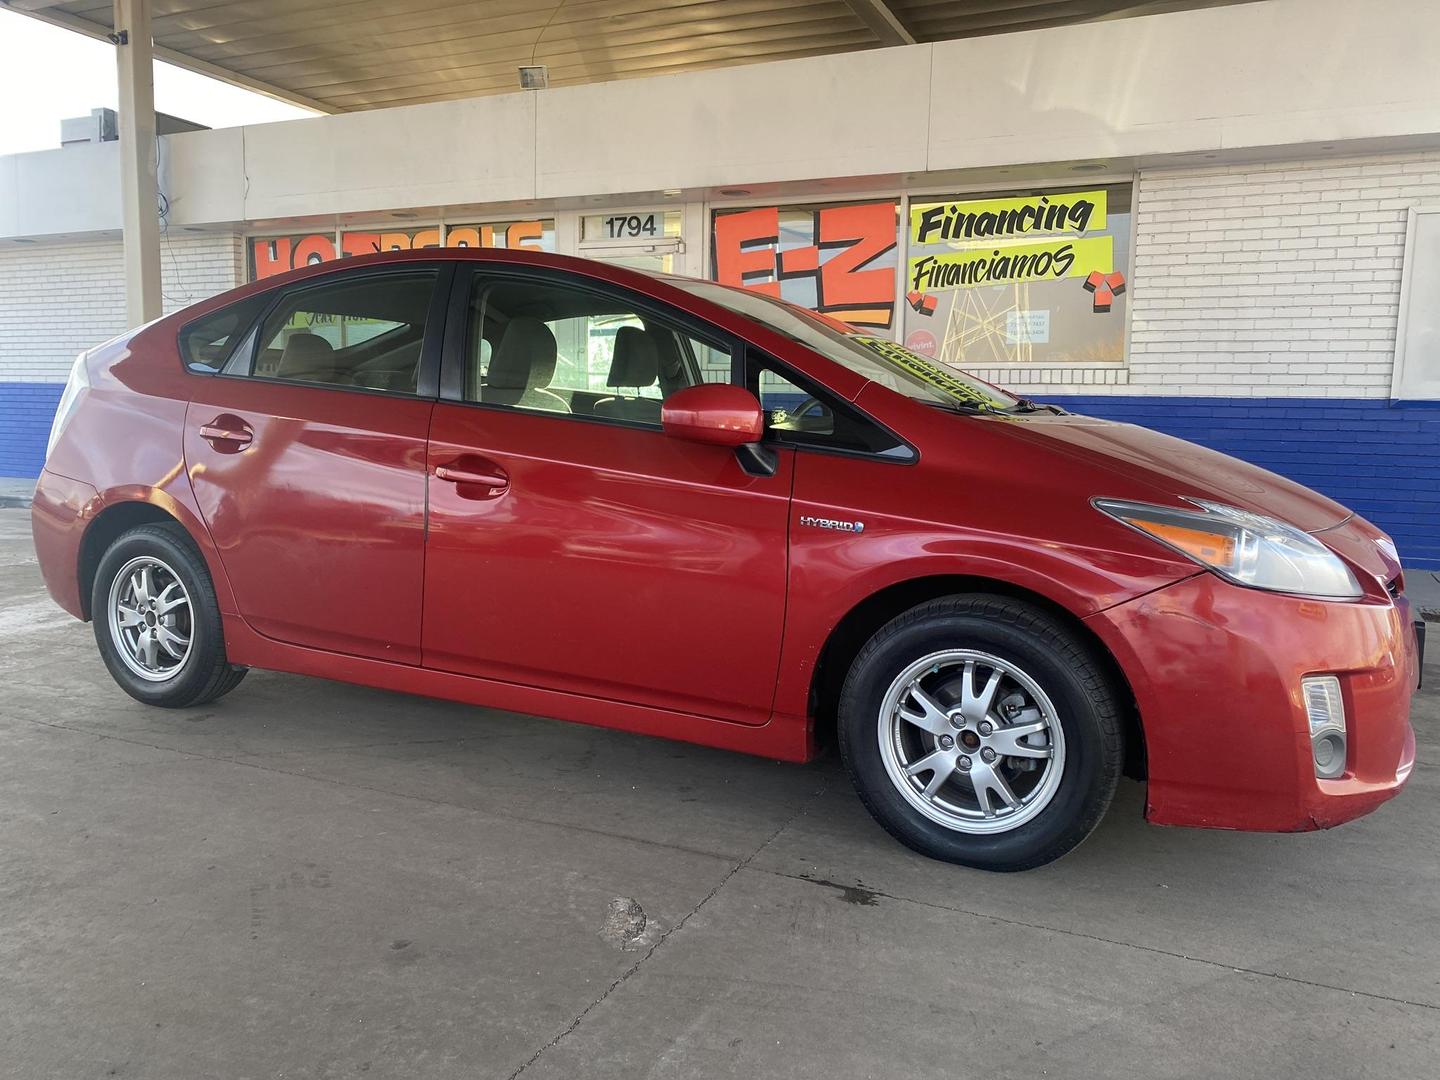 USED TOYOTA PRIUS 2010 for sale in Colorado Springs, CO